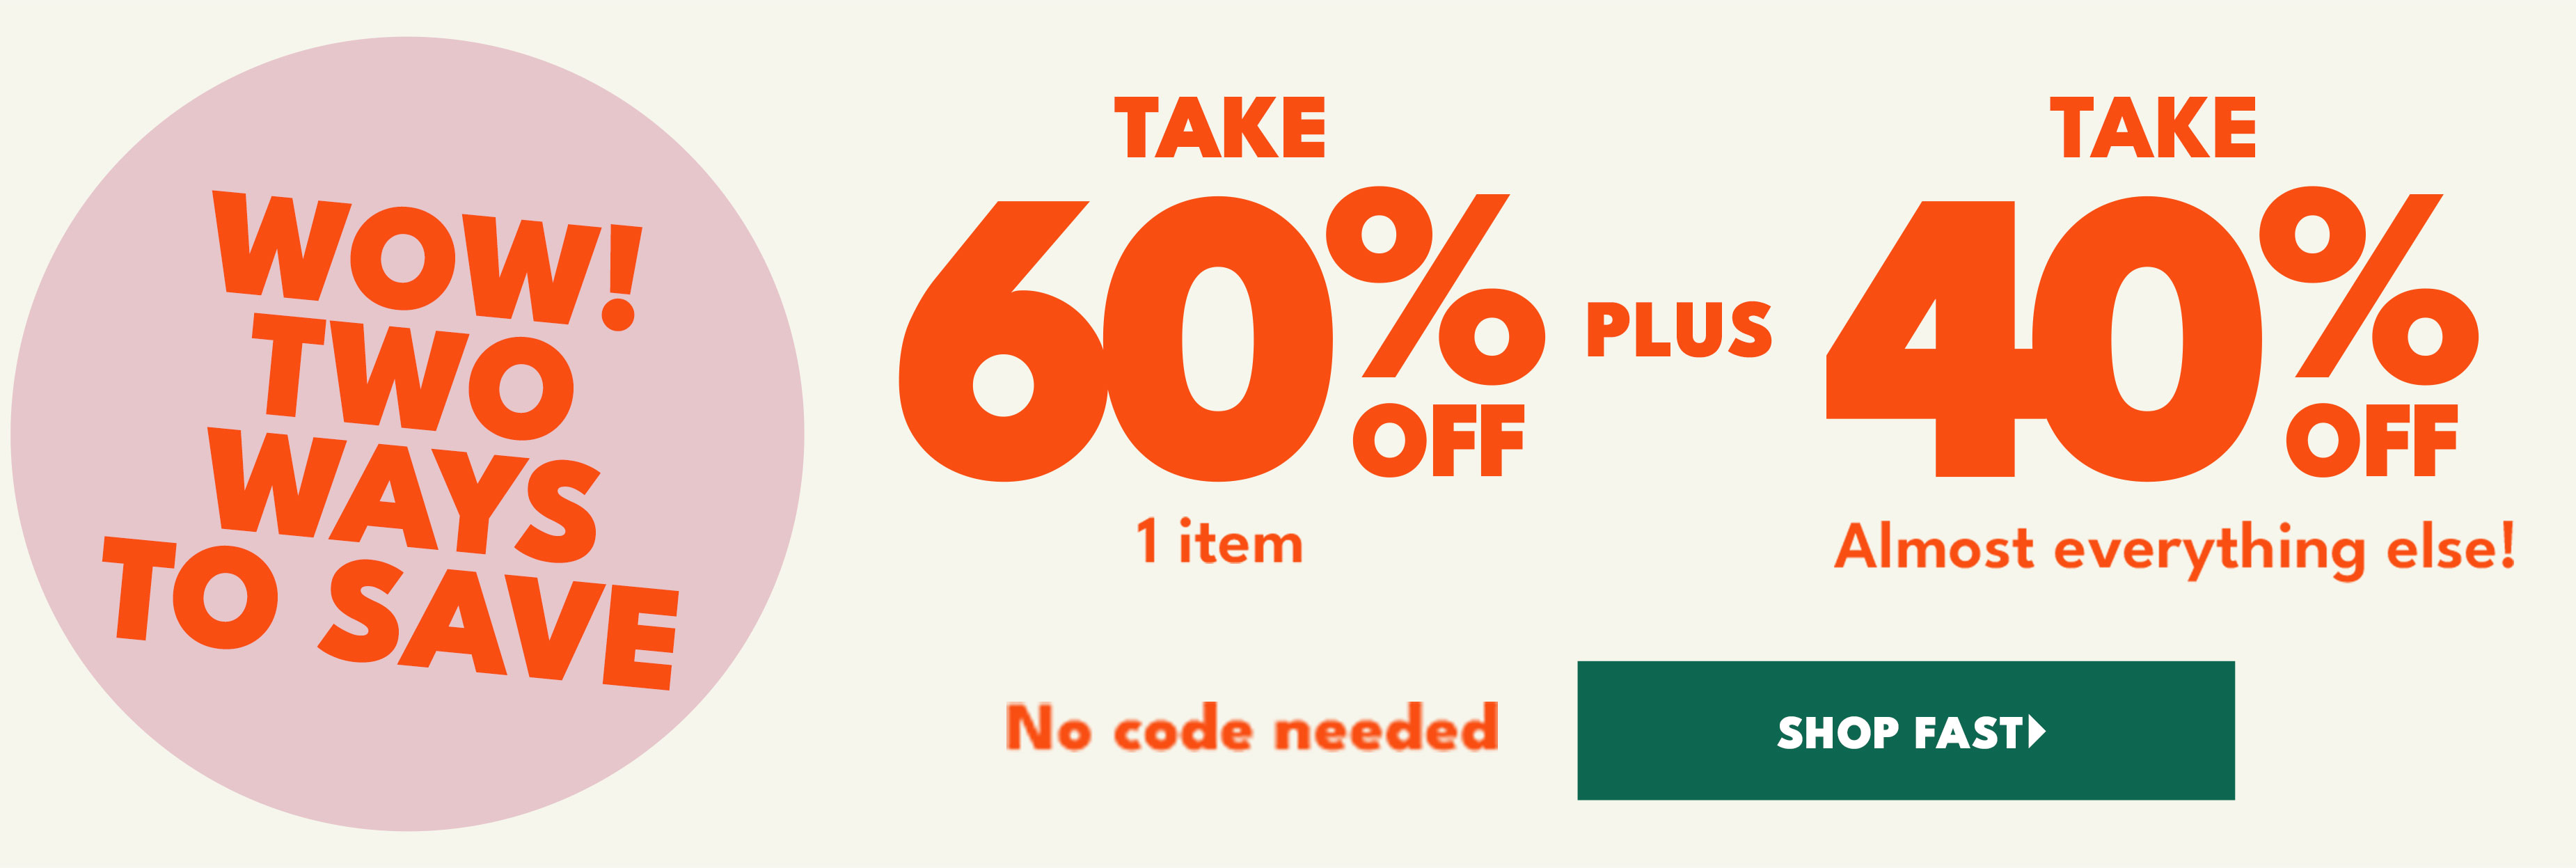 Wow! Two ways to save. Take 60% off plus take 40% off almost everything else! shop fast